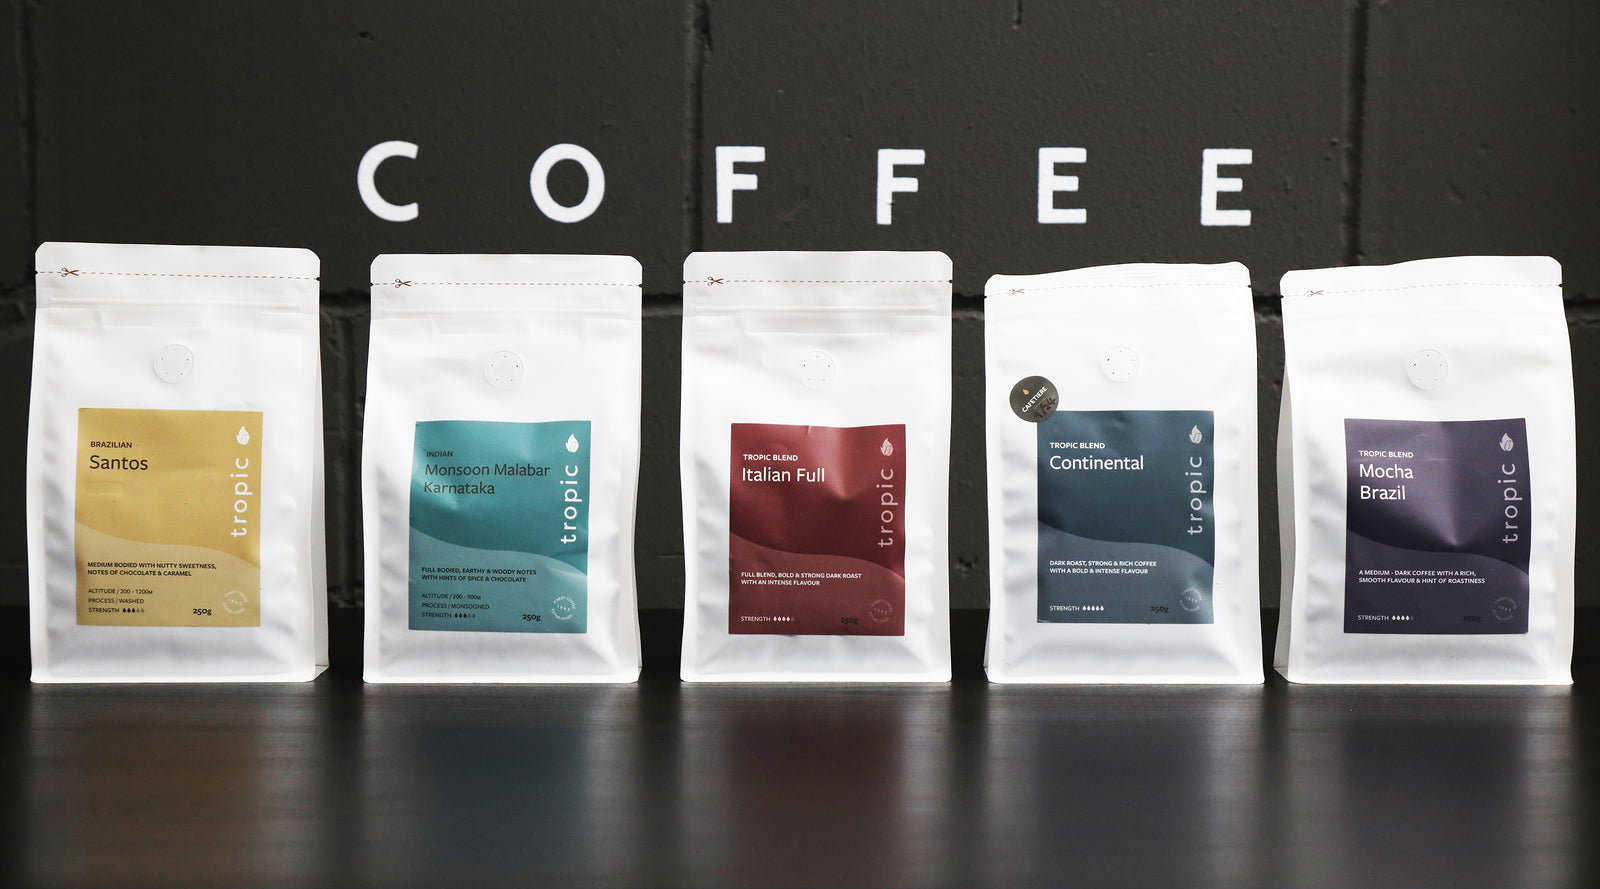 Introducing Tropic Coffee's Fresh Packaging and Faster Delivery!